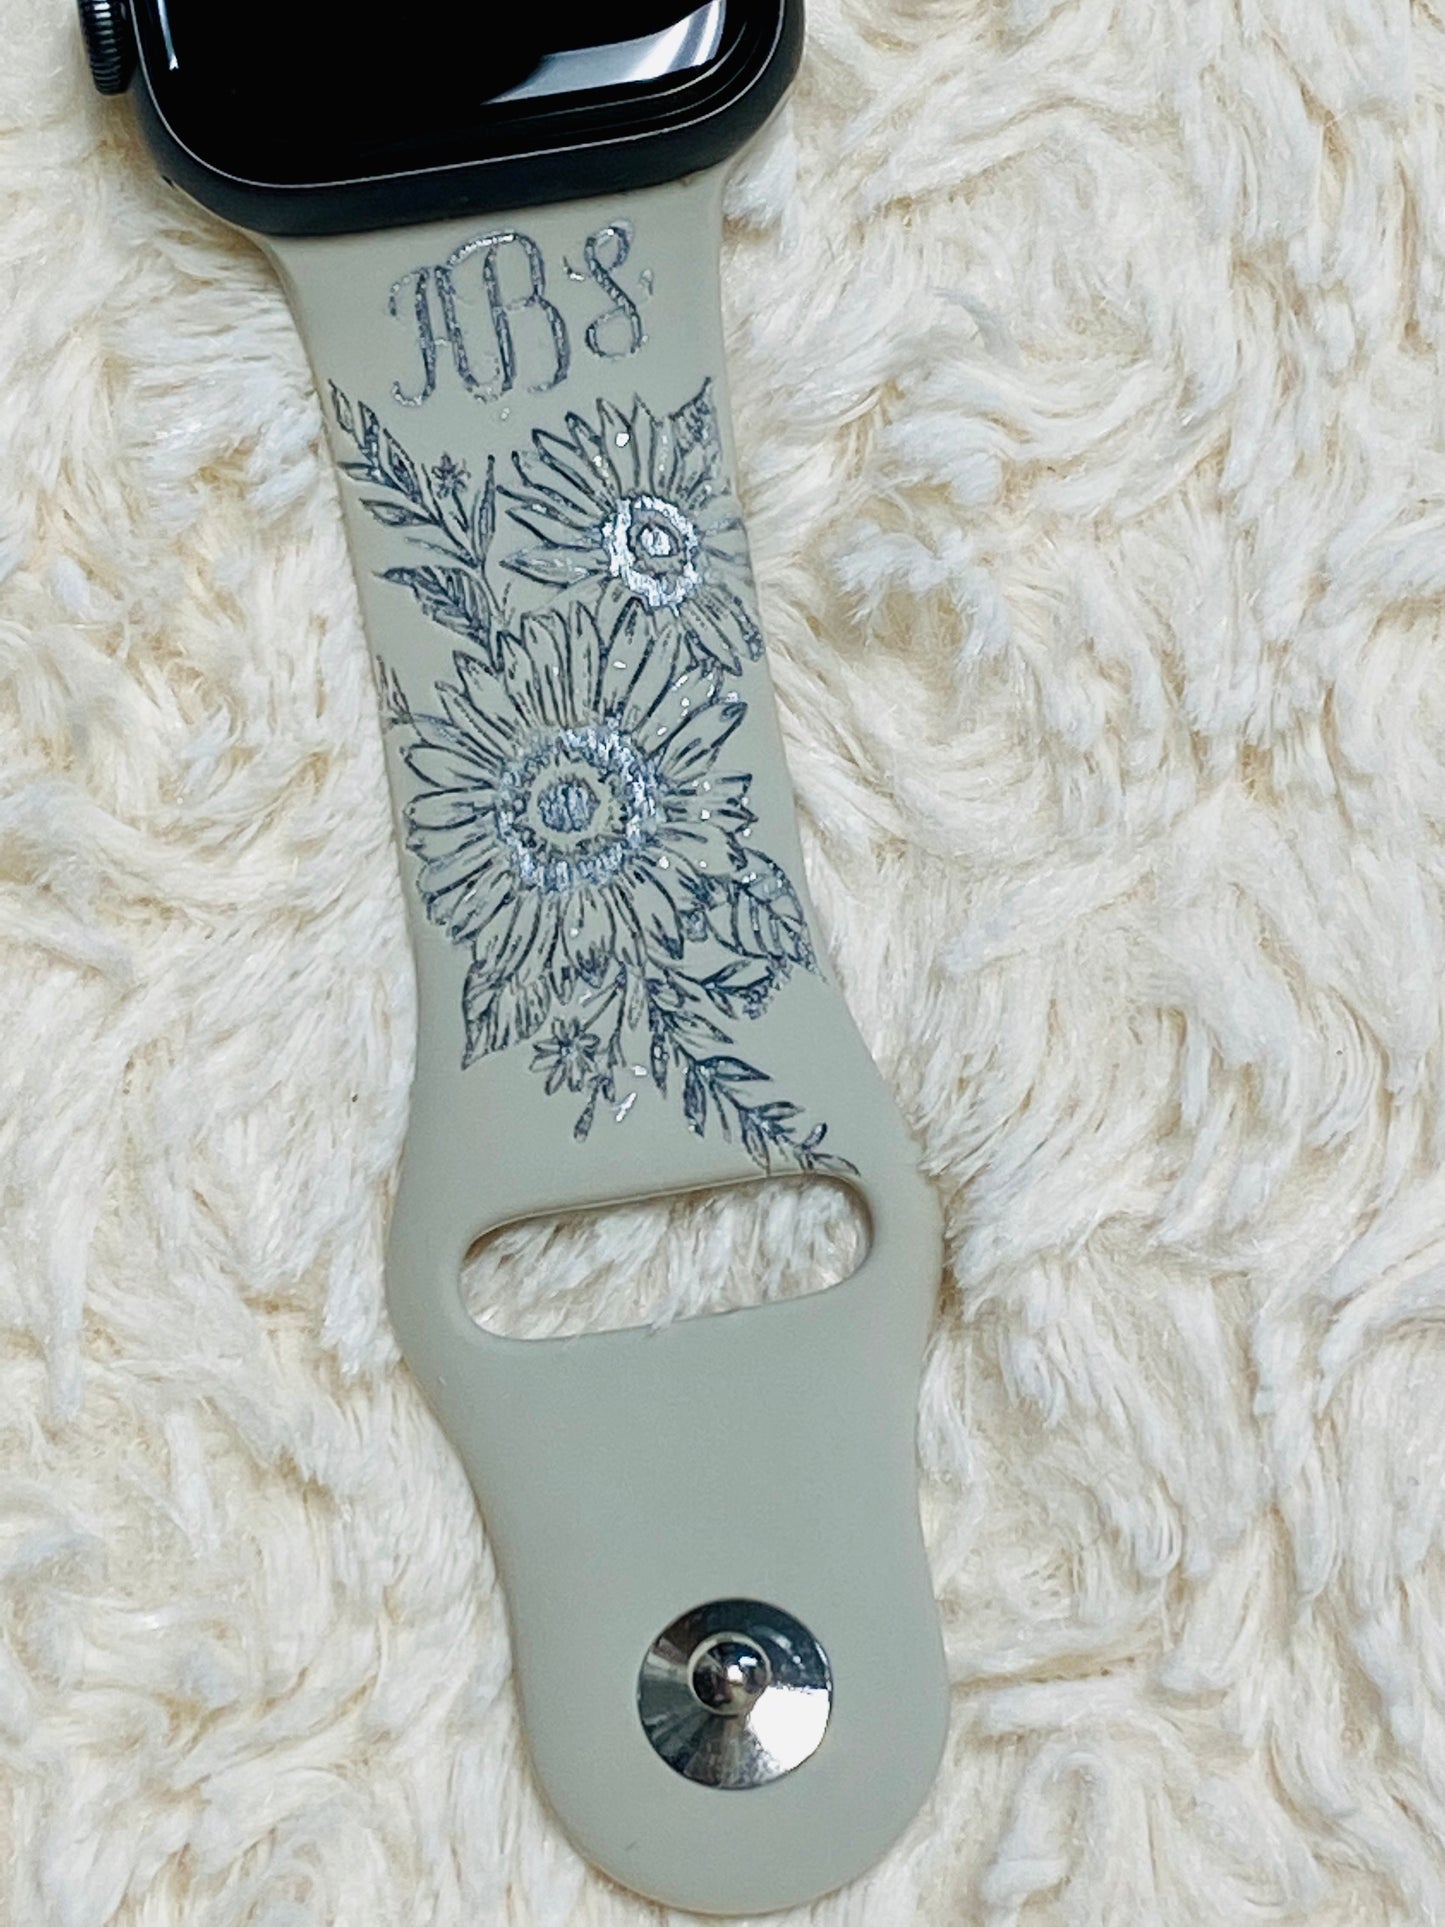 Personalized Apple Watch Band. - Bair Prints